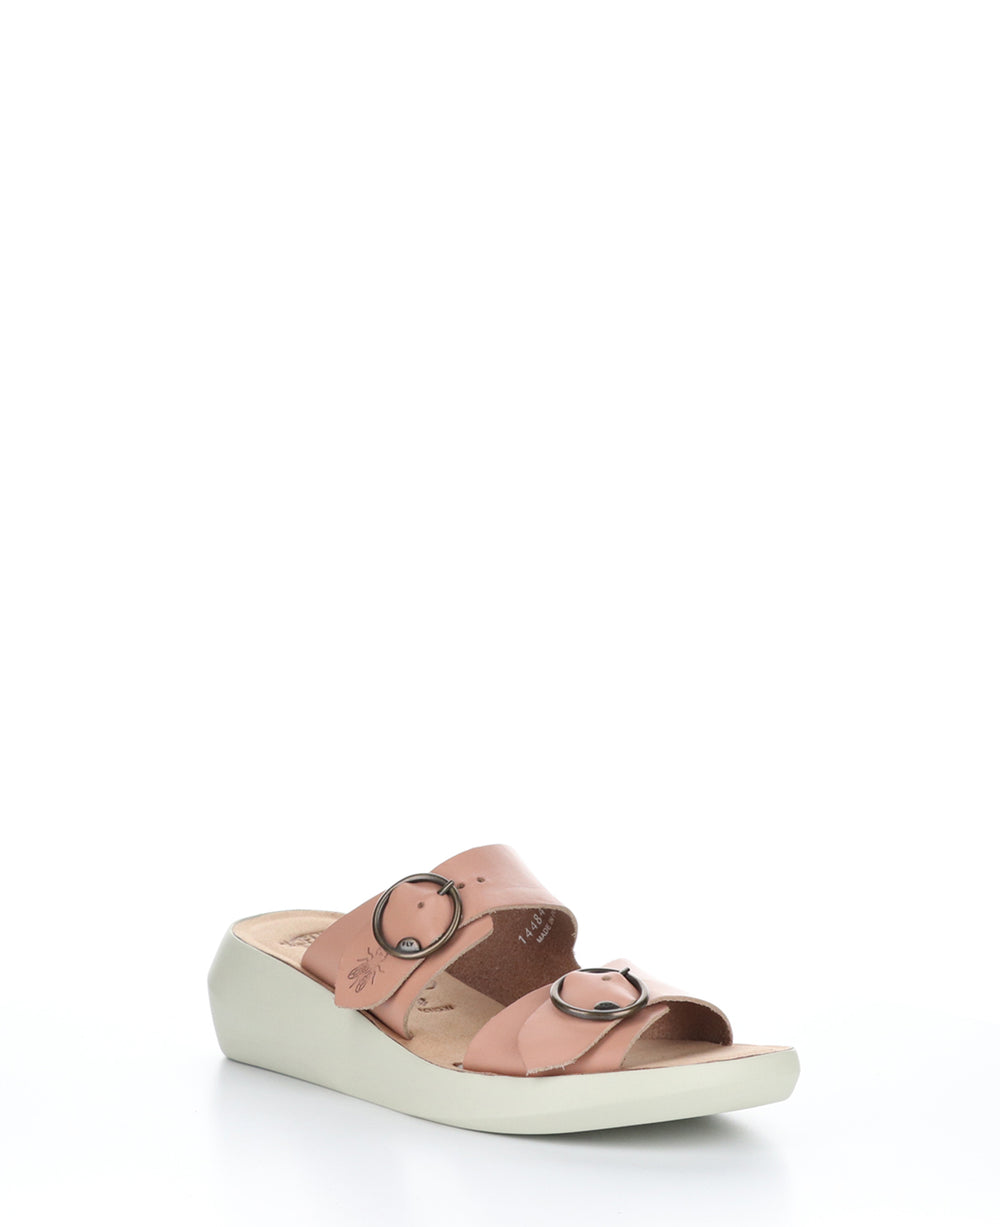 BALD849FLY ROSE Wedge Sandals|BALD849FLY Chaussures à Bout Rond in Rose